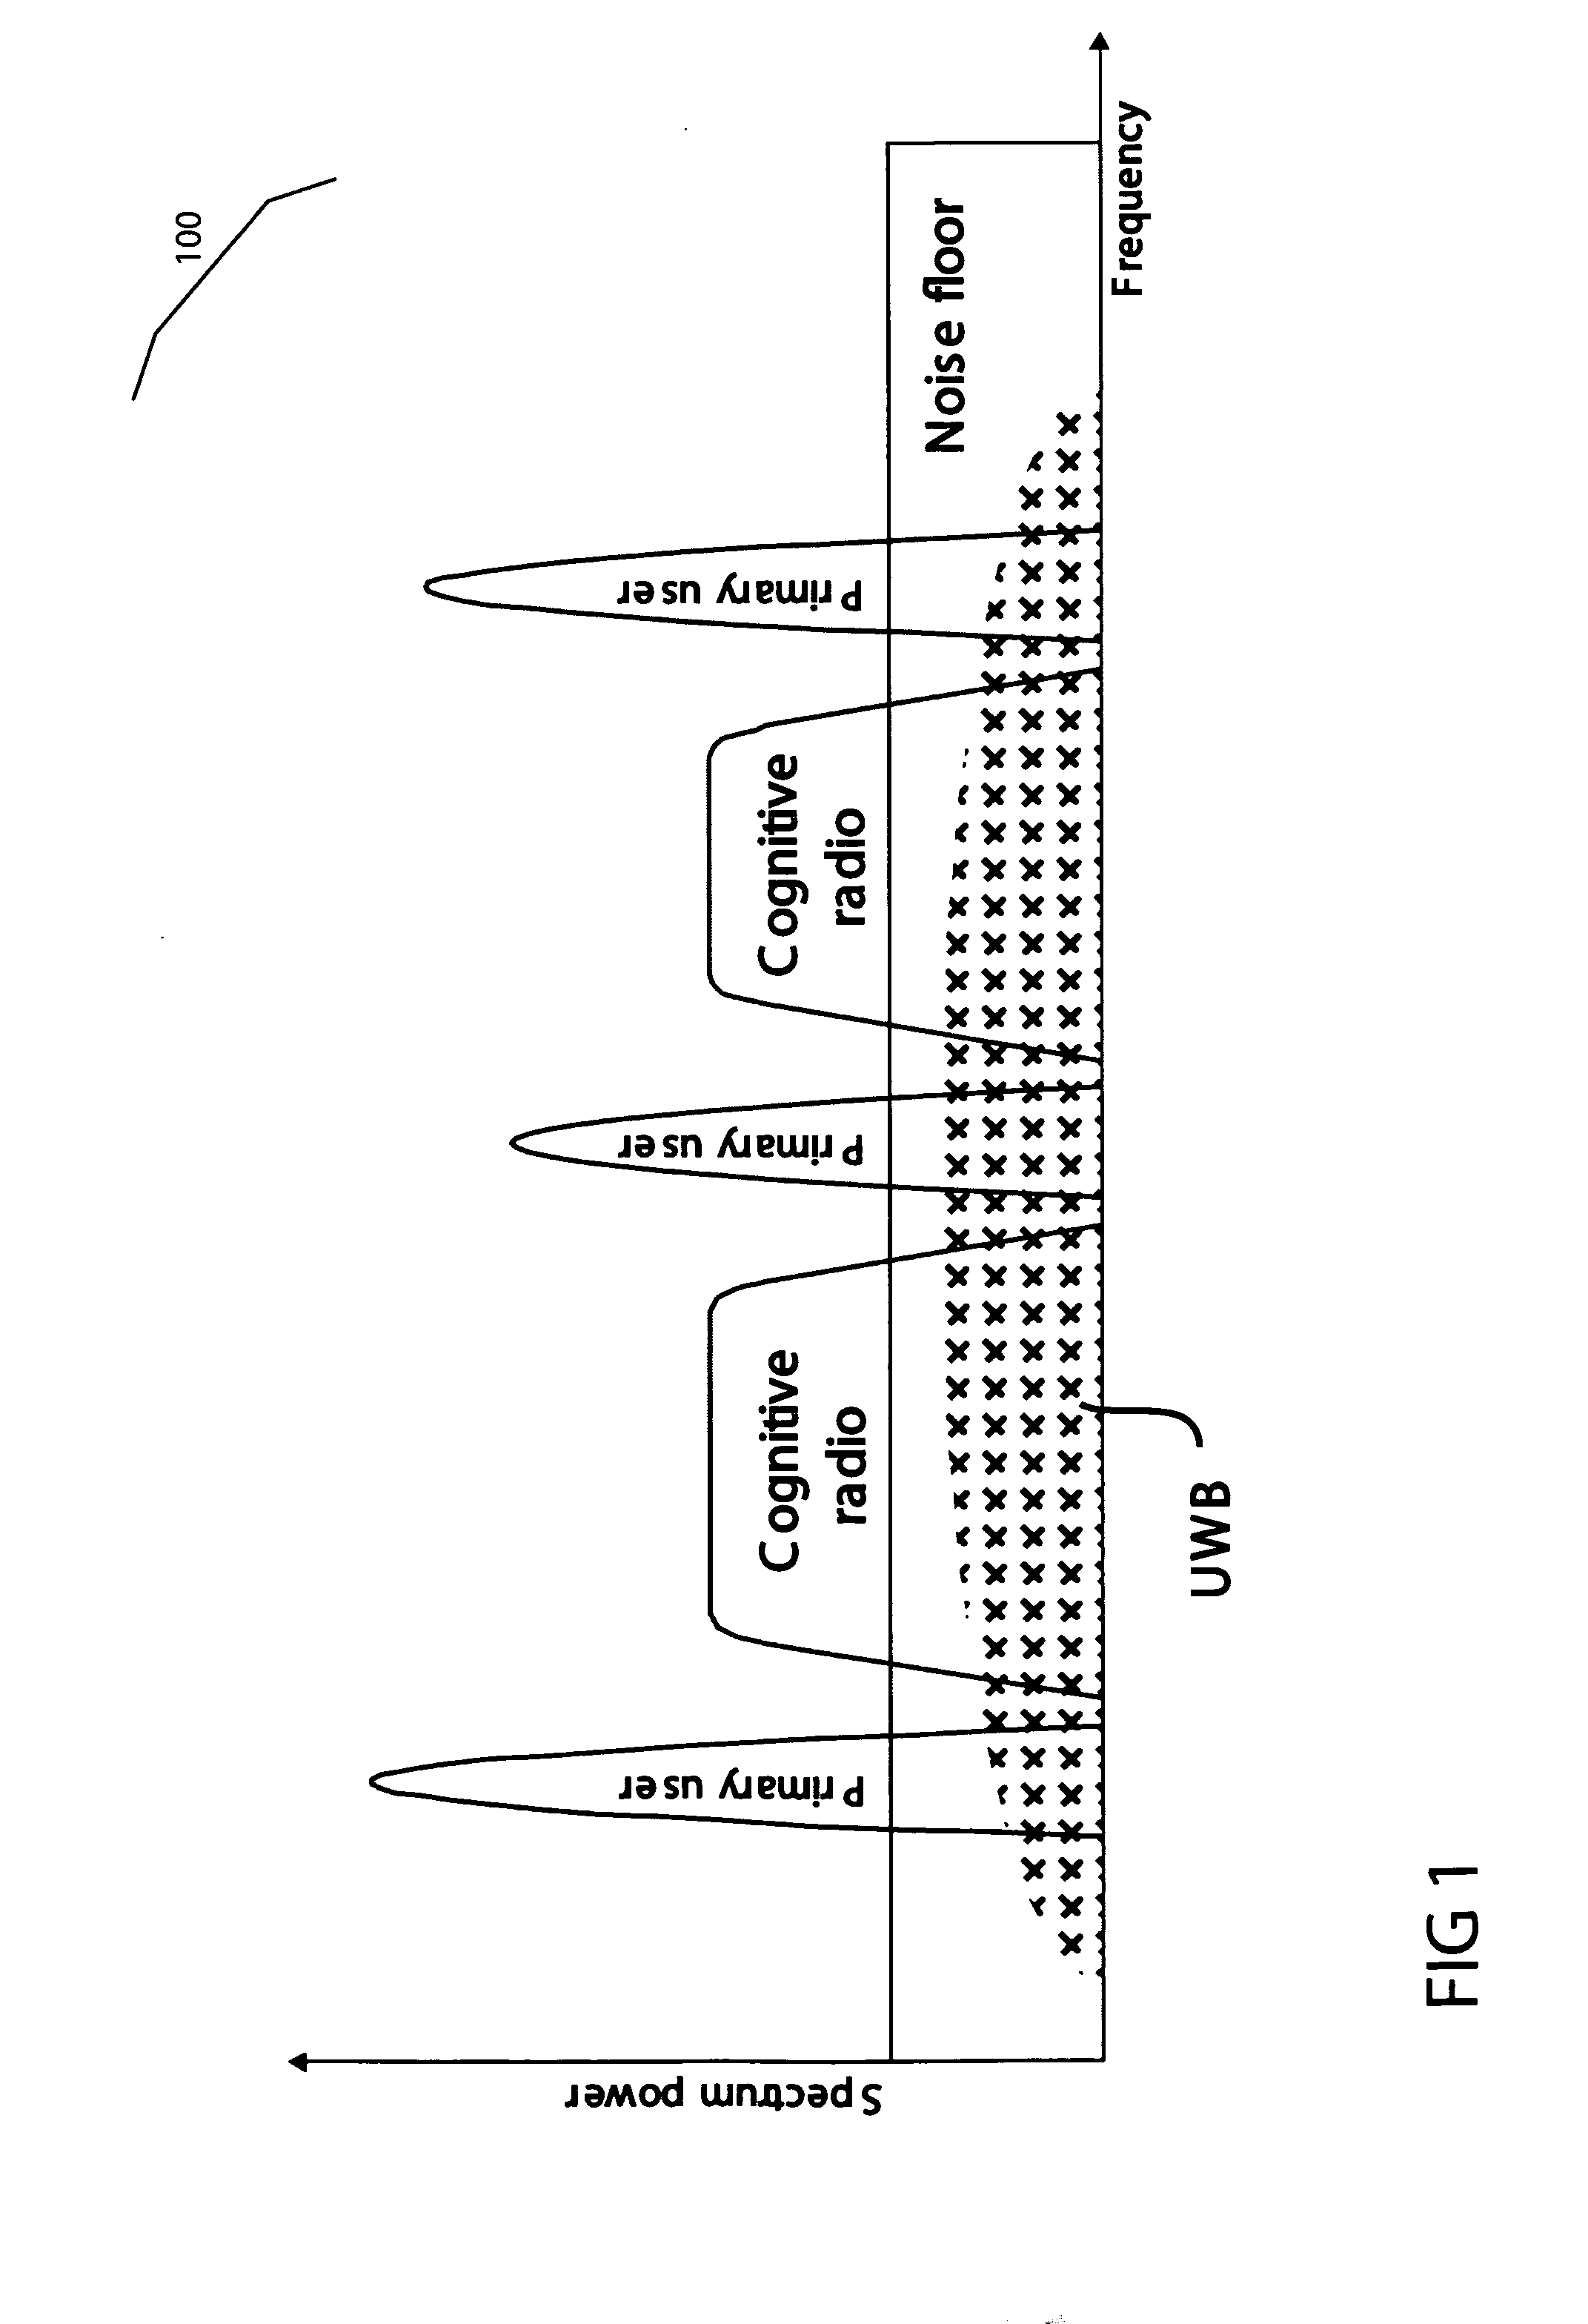 Combined sensing methods for cognitive radio